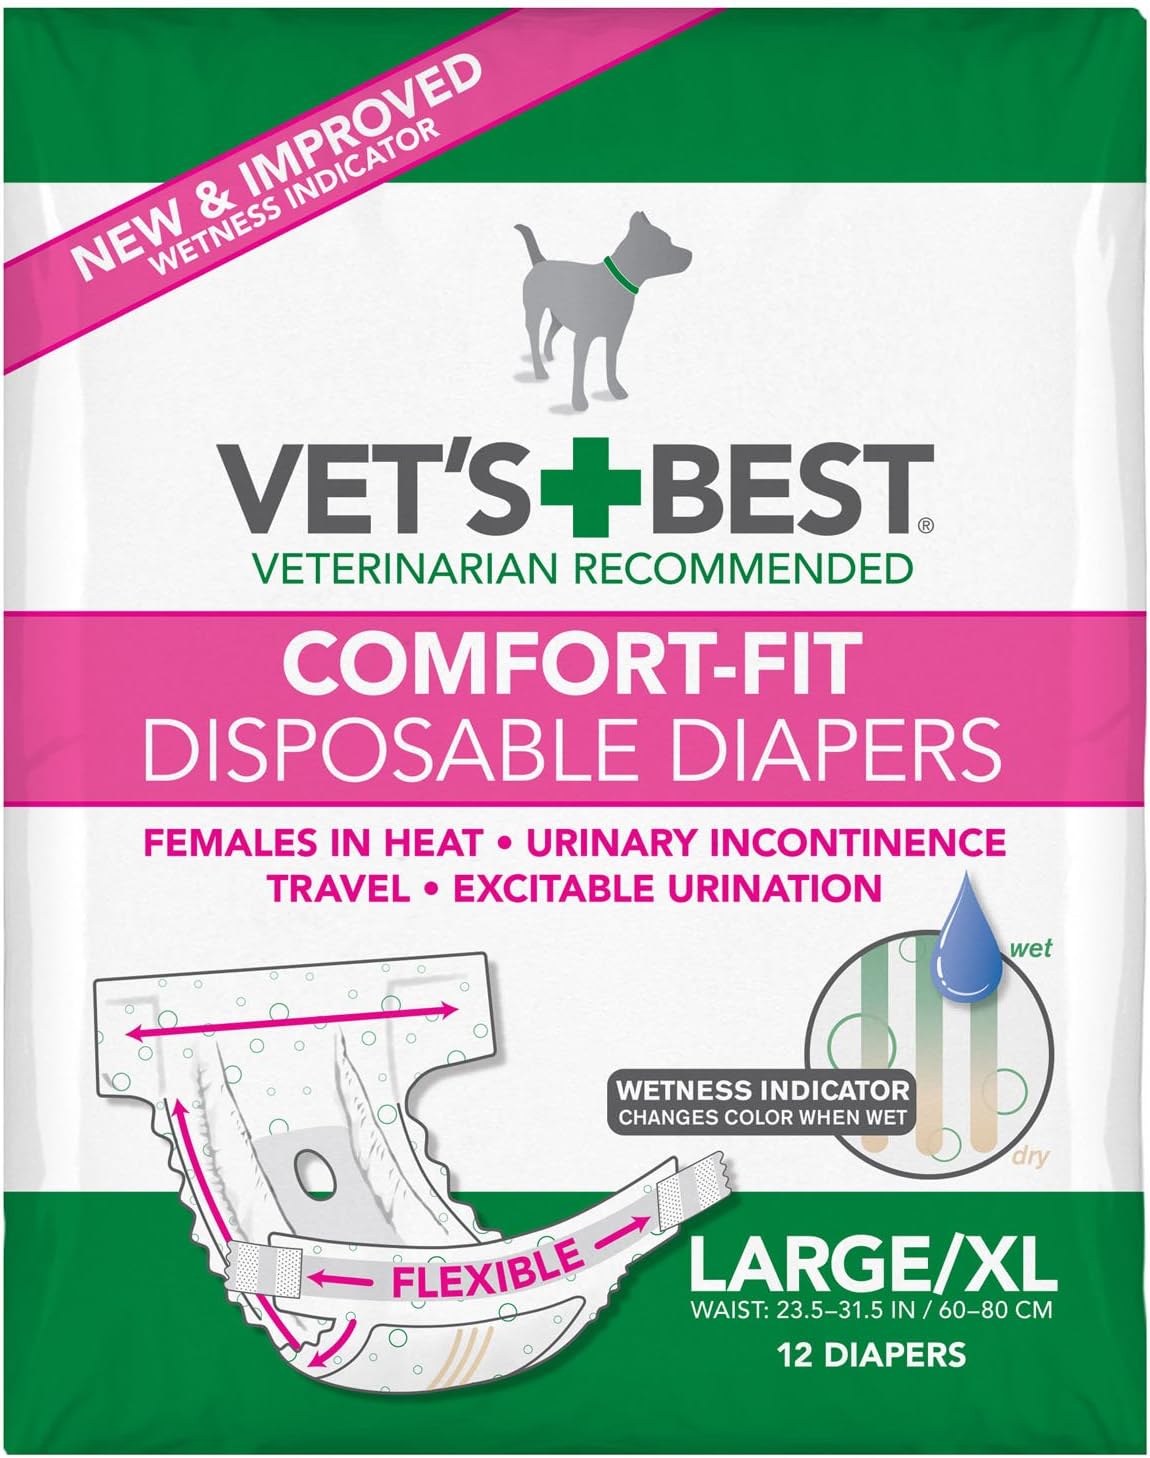 Vet's Best Comfort Fit Dog Diapers | Disposable Female Dog Diapers | Absorbent with Leak Proof Fit | Large/XL 12 Count?3165810448